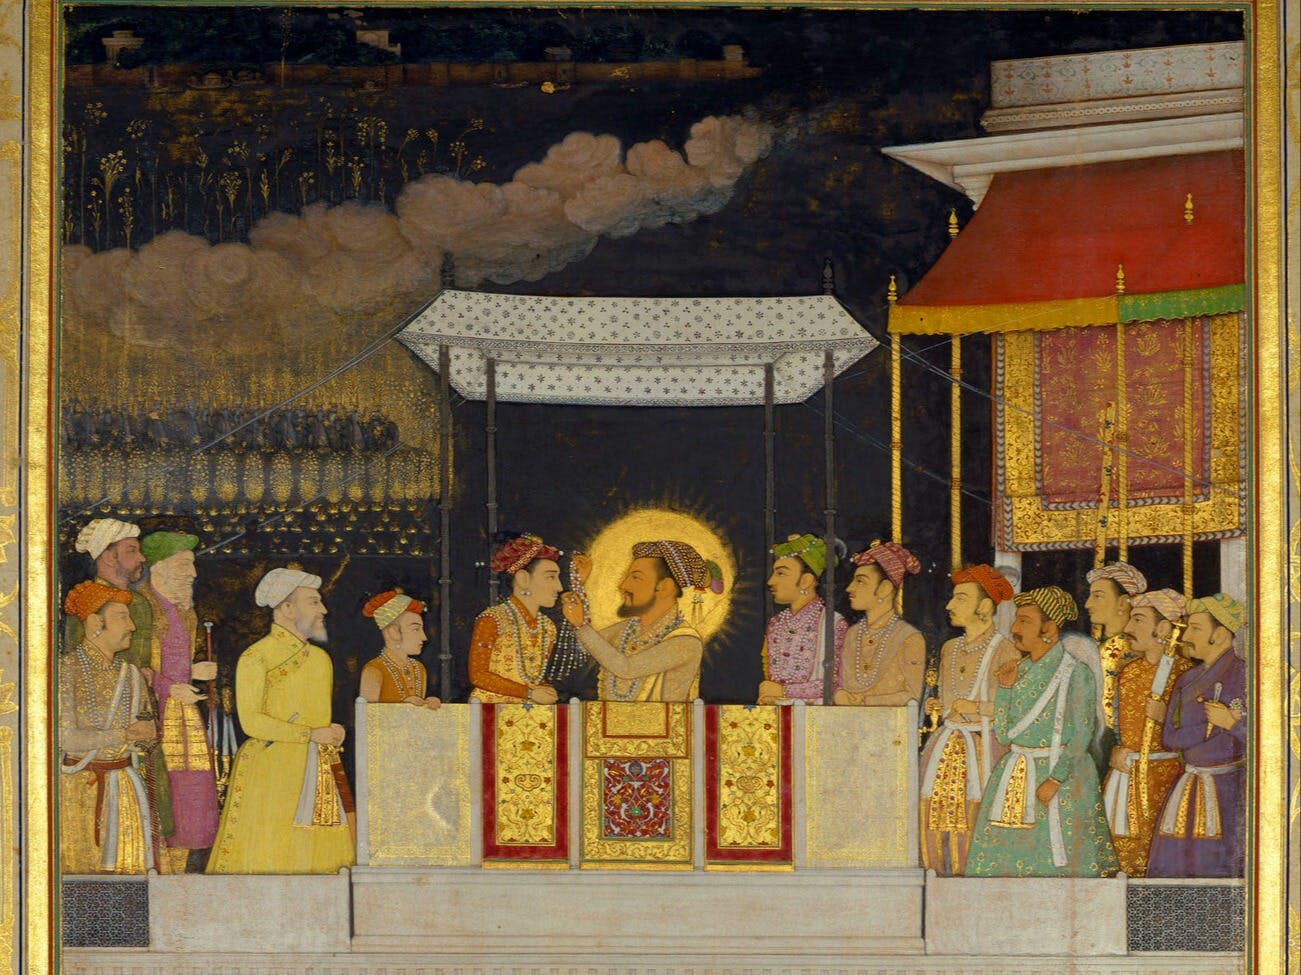 Padshahnamah, Book of Emperors (Royal Collection Trust)